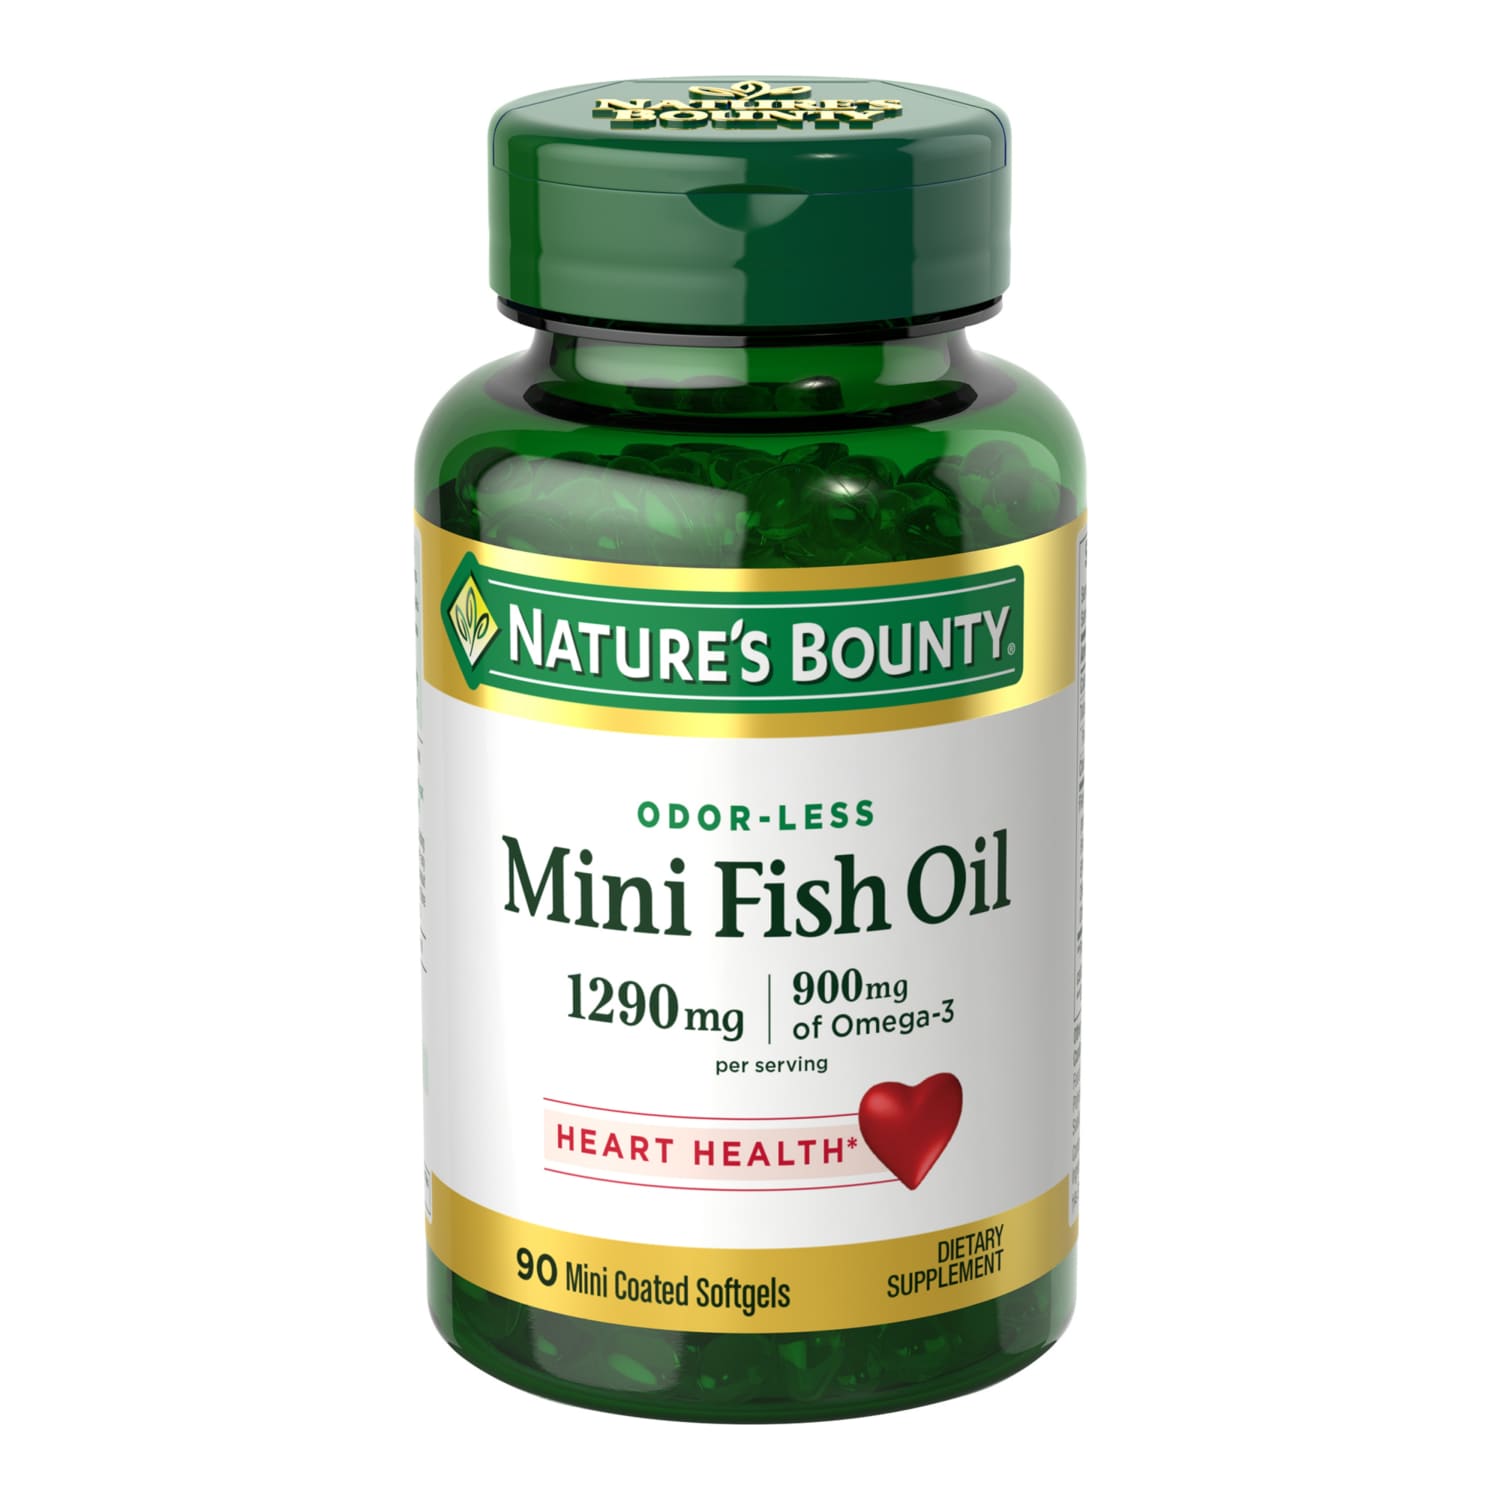 Nature's Bounty Mini Fish Oil Odorless Softgels, 1290 Mg, 90 Ct - image 1 of 6